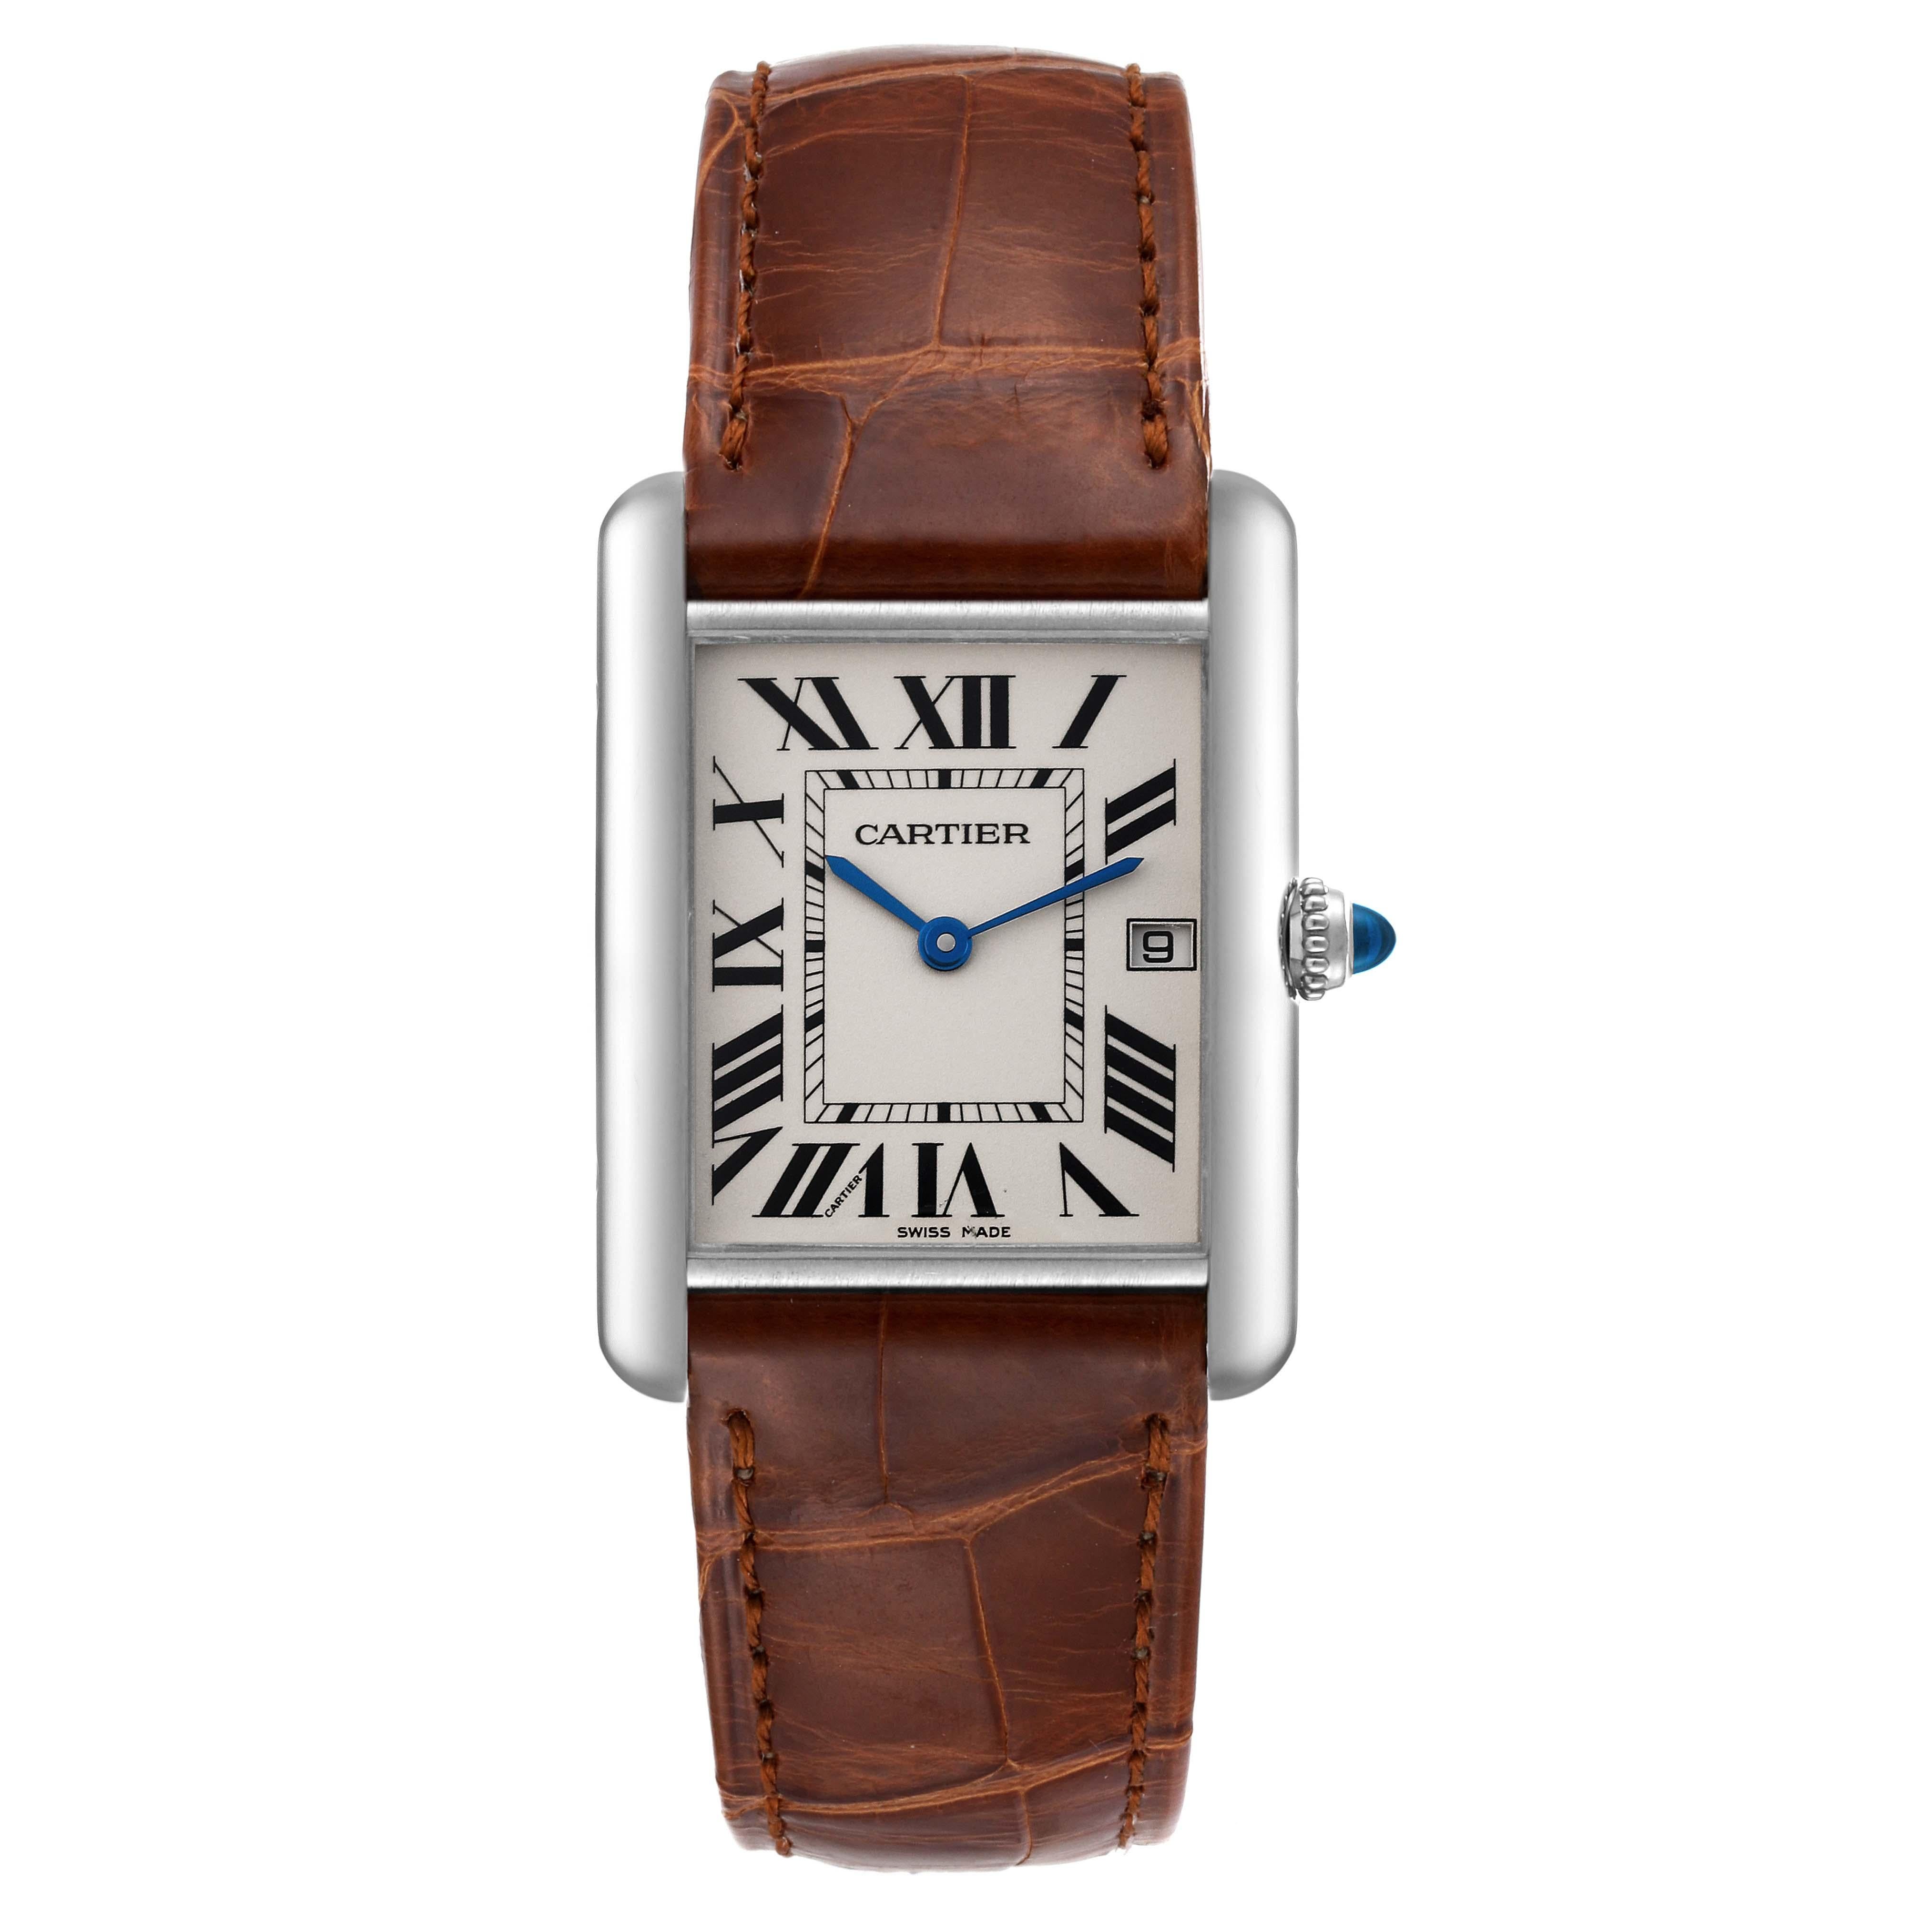 Cartier Tank Louis Large White Gold Brown Strap Mens Watch W1540956. Quartz movement. 18k white gold case 25.0 x 33.0 mm. Circular grained crown set with blue sapphire cabochon. . Scratch resistant sapphire crystal. Silvered grained dial with black